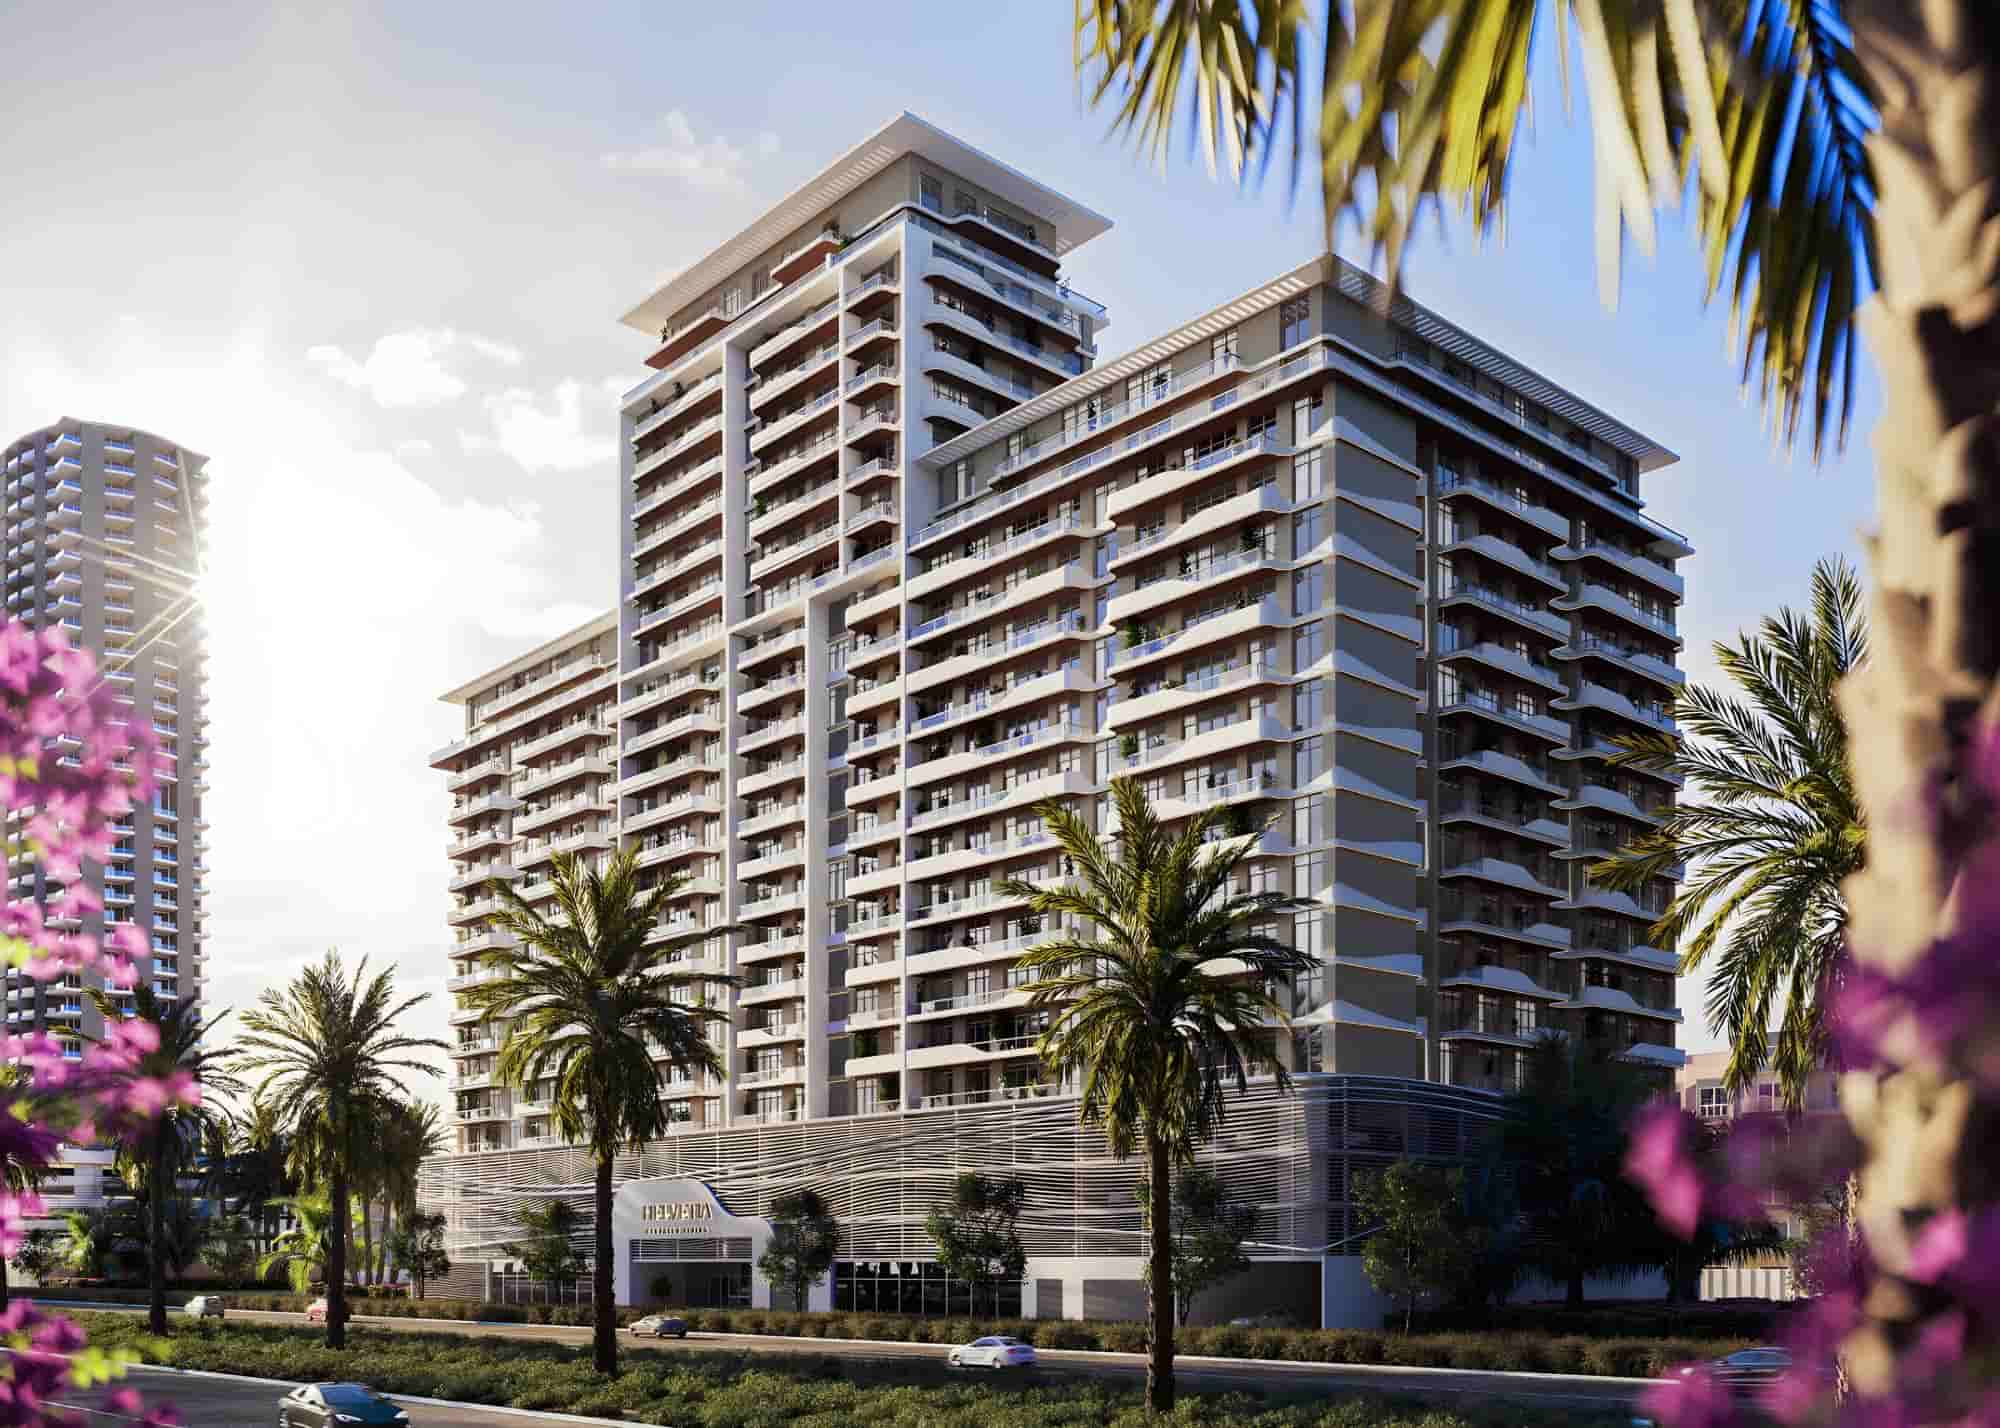 Explore the embellished and ravishing life at Helvetia Residences. It is the Eden of modernity and luxury. Read more!